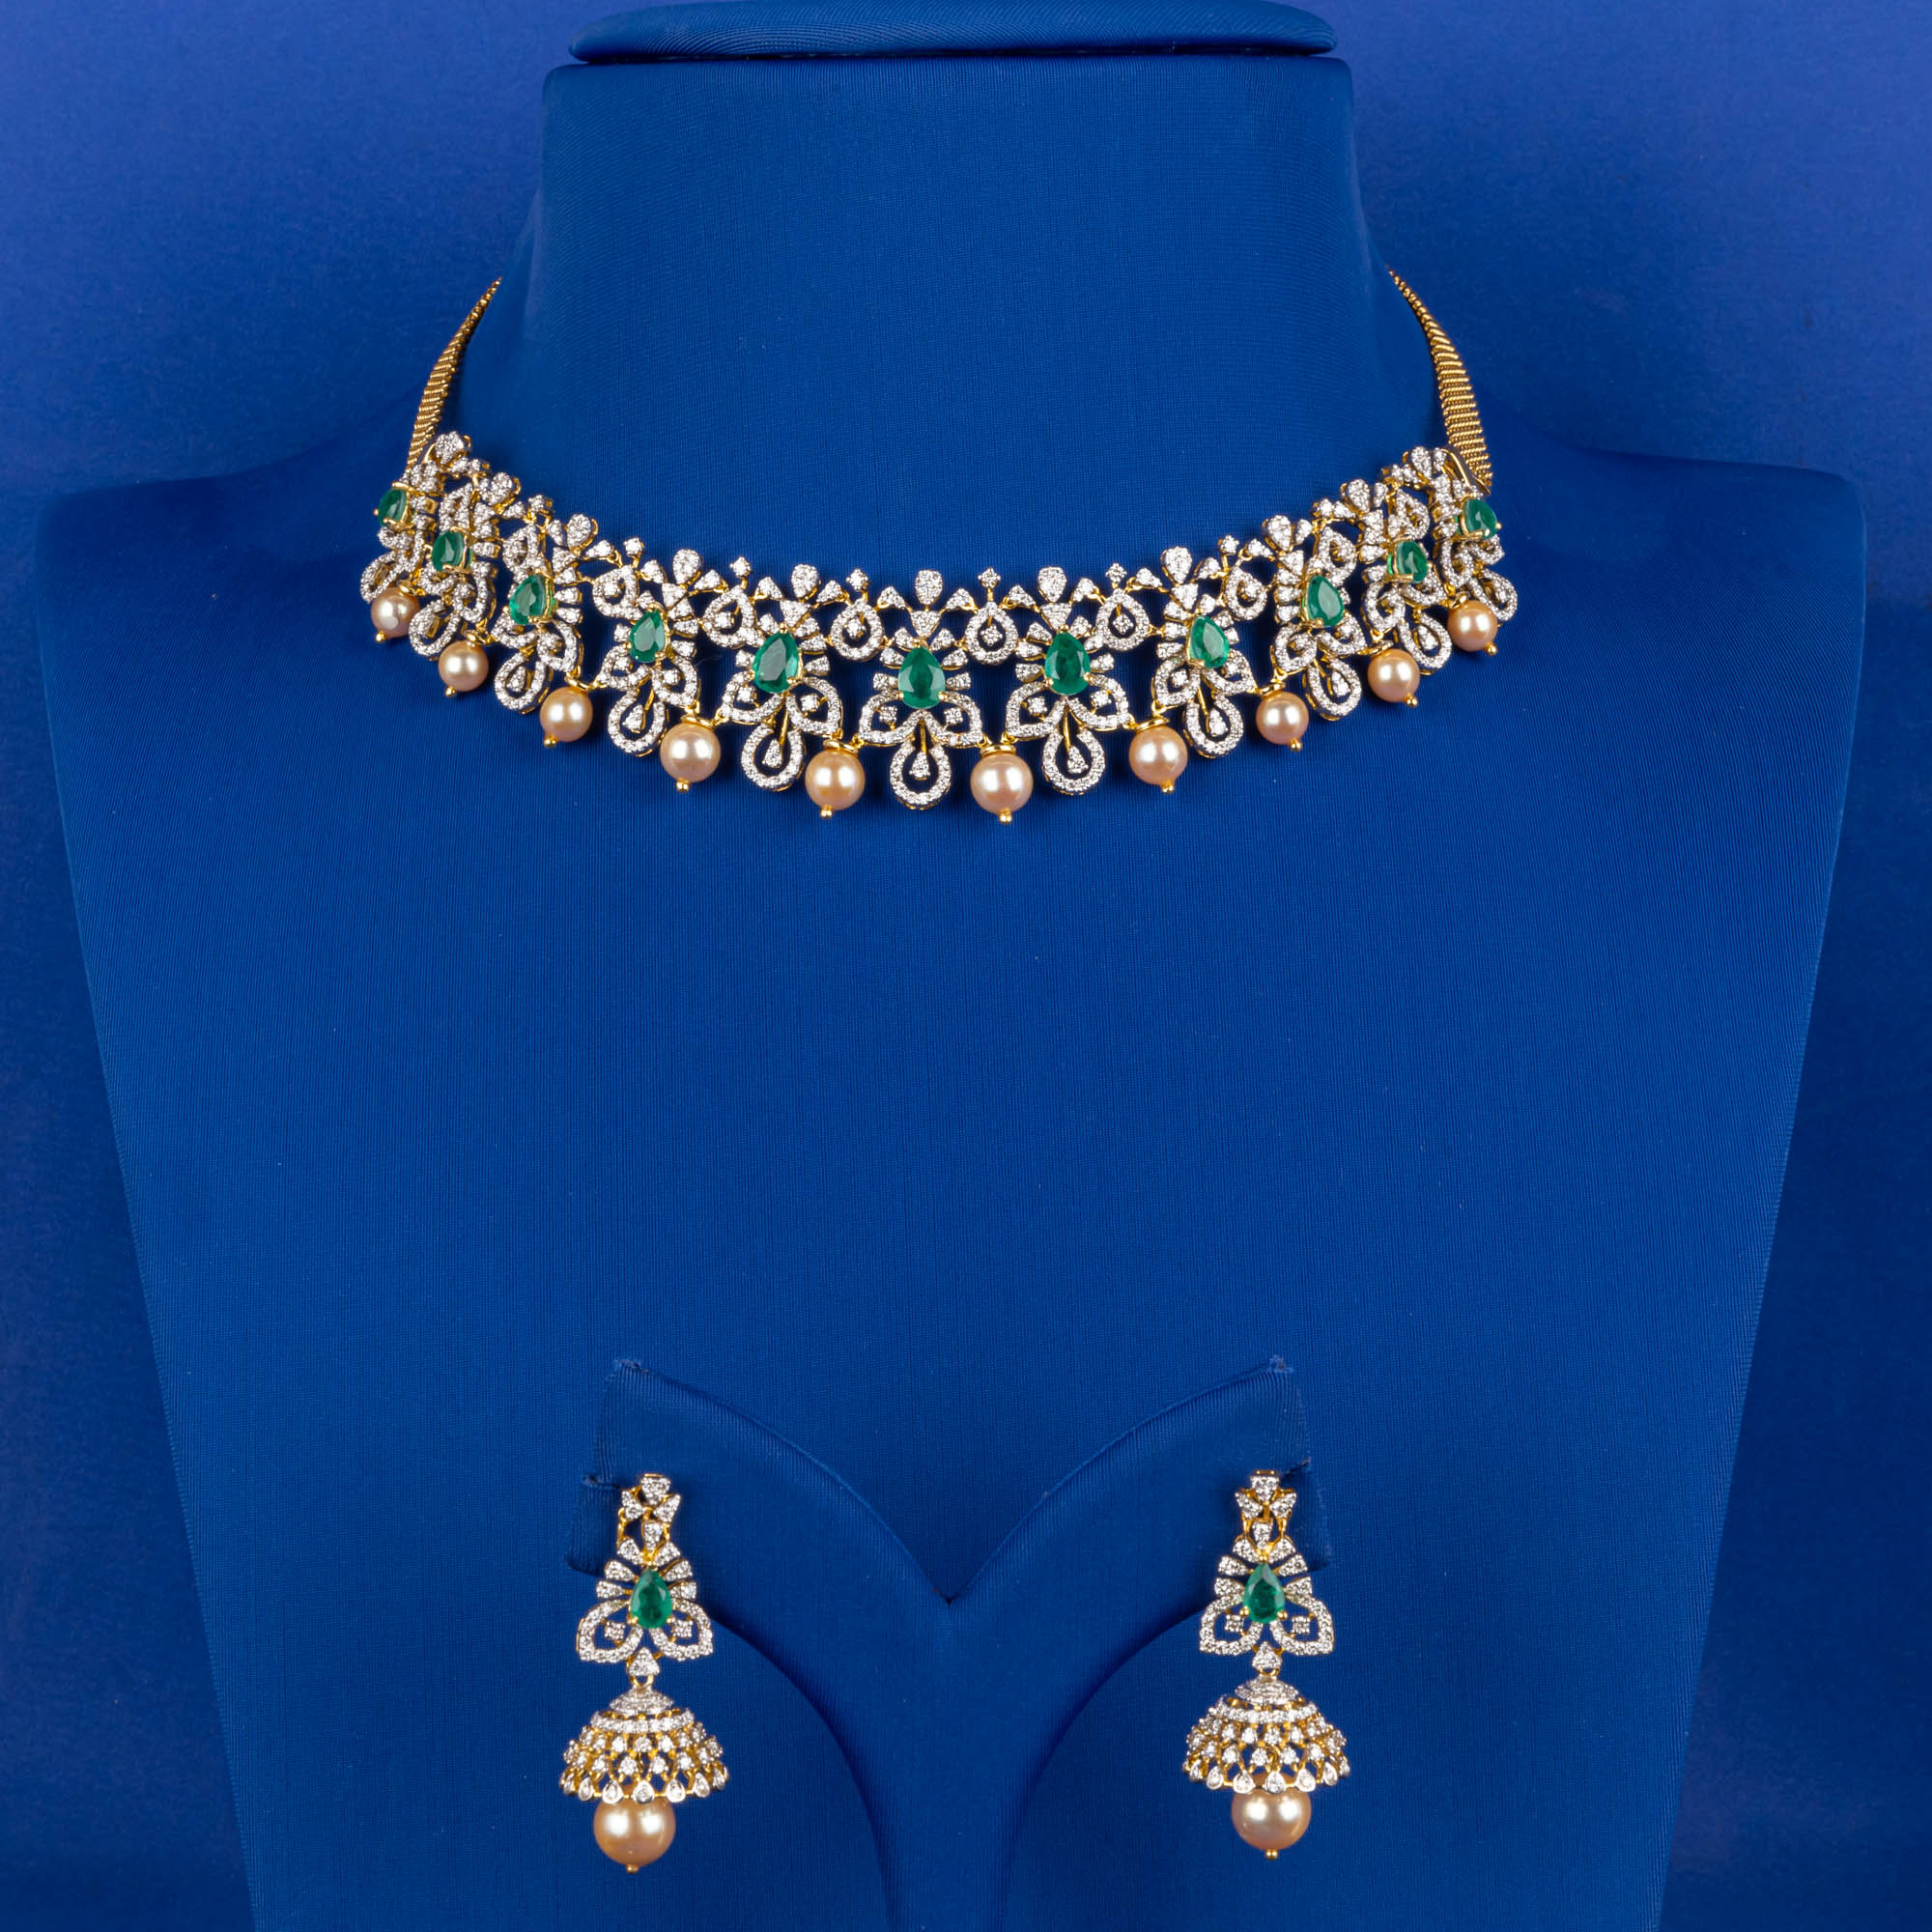 Handmade 18K Yellow Gold Diamond Neckalce and Earrings with Emeralds and Pearls